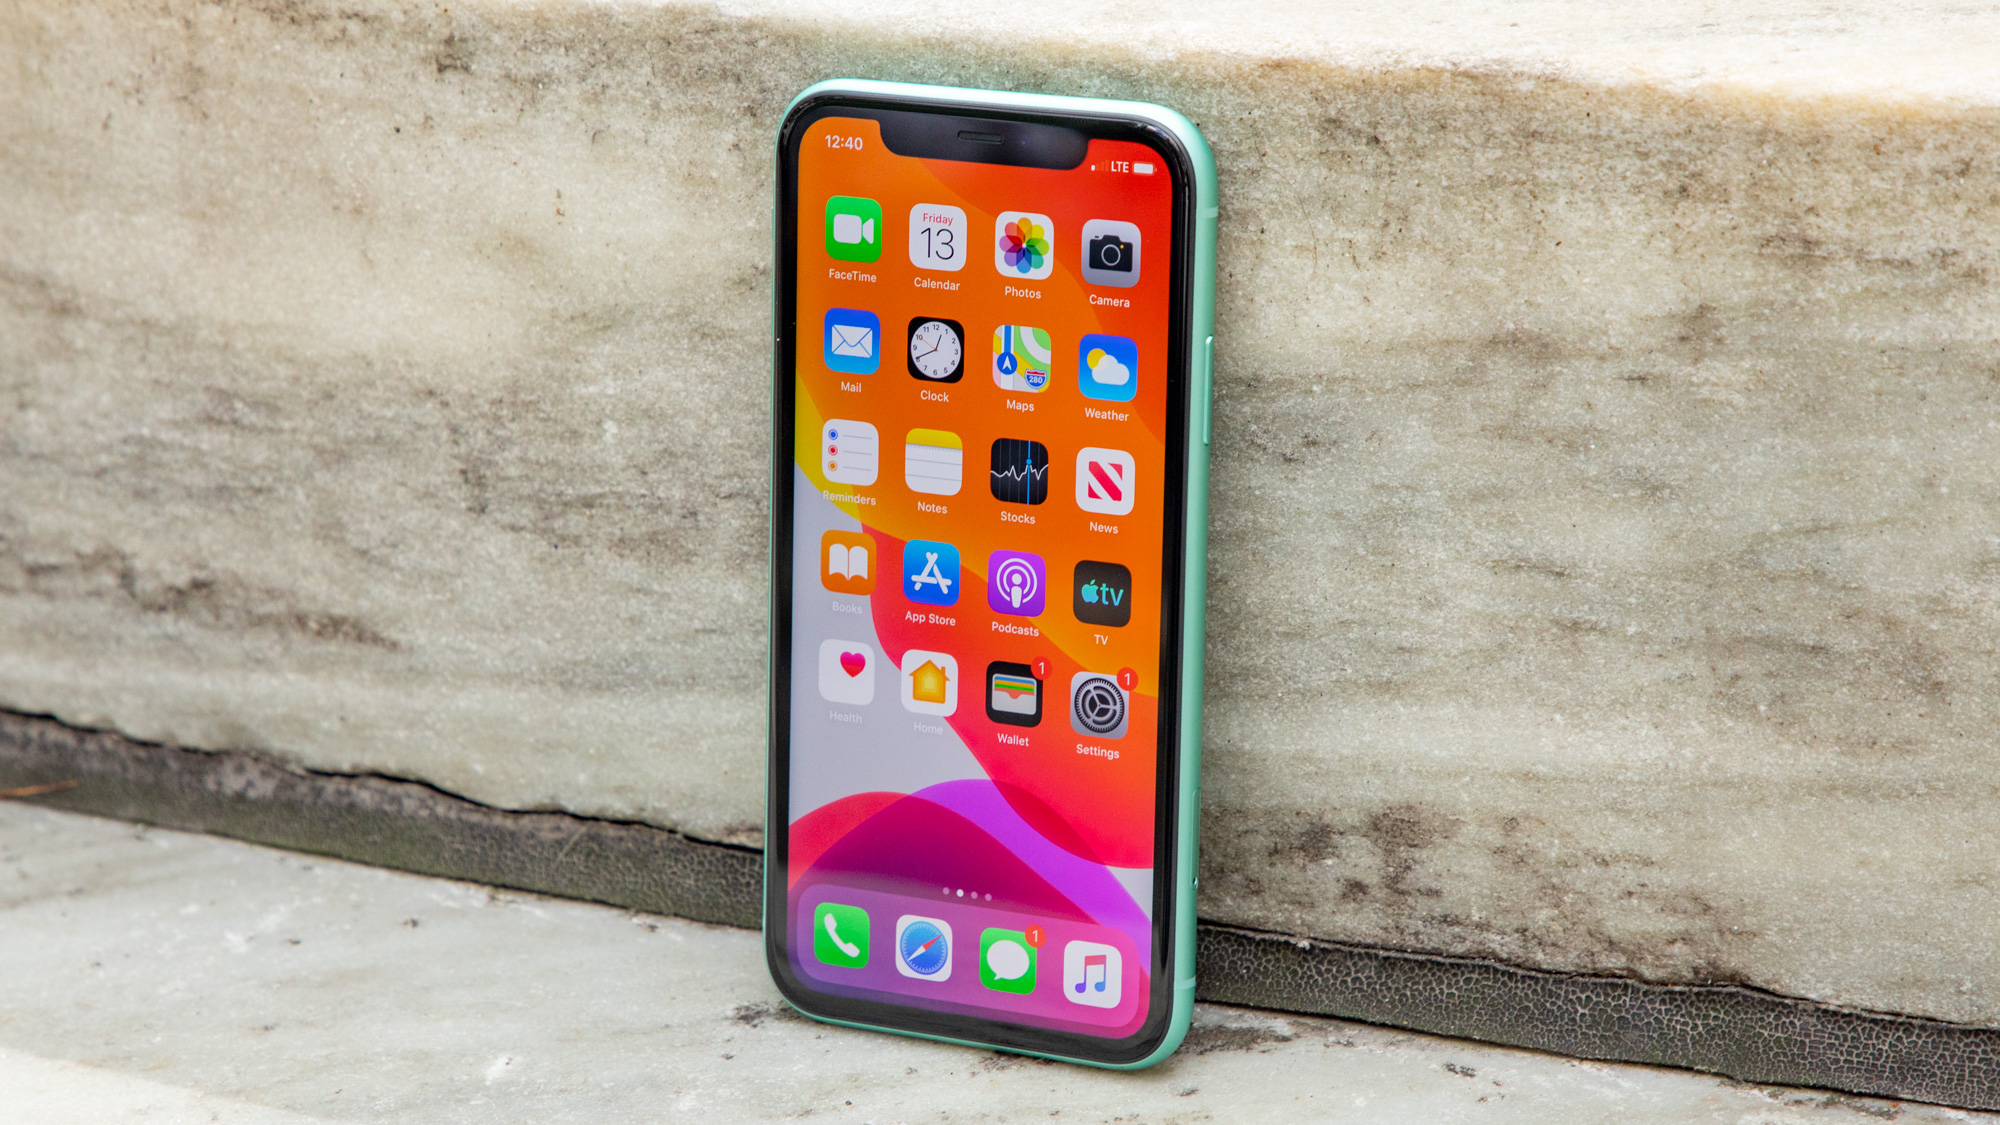 the iphone 11 is still one of the best unlocked phones even if it doesn't have 5g